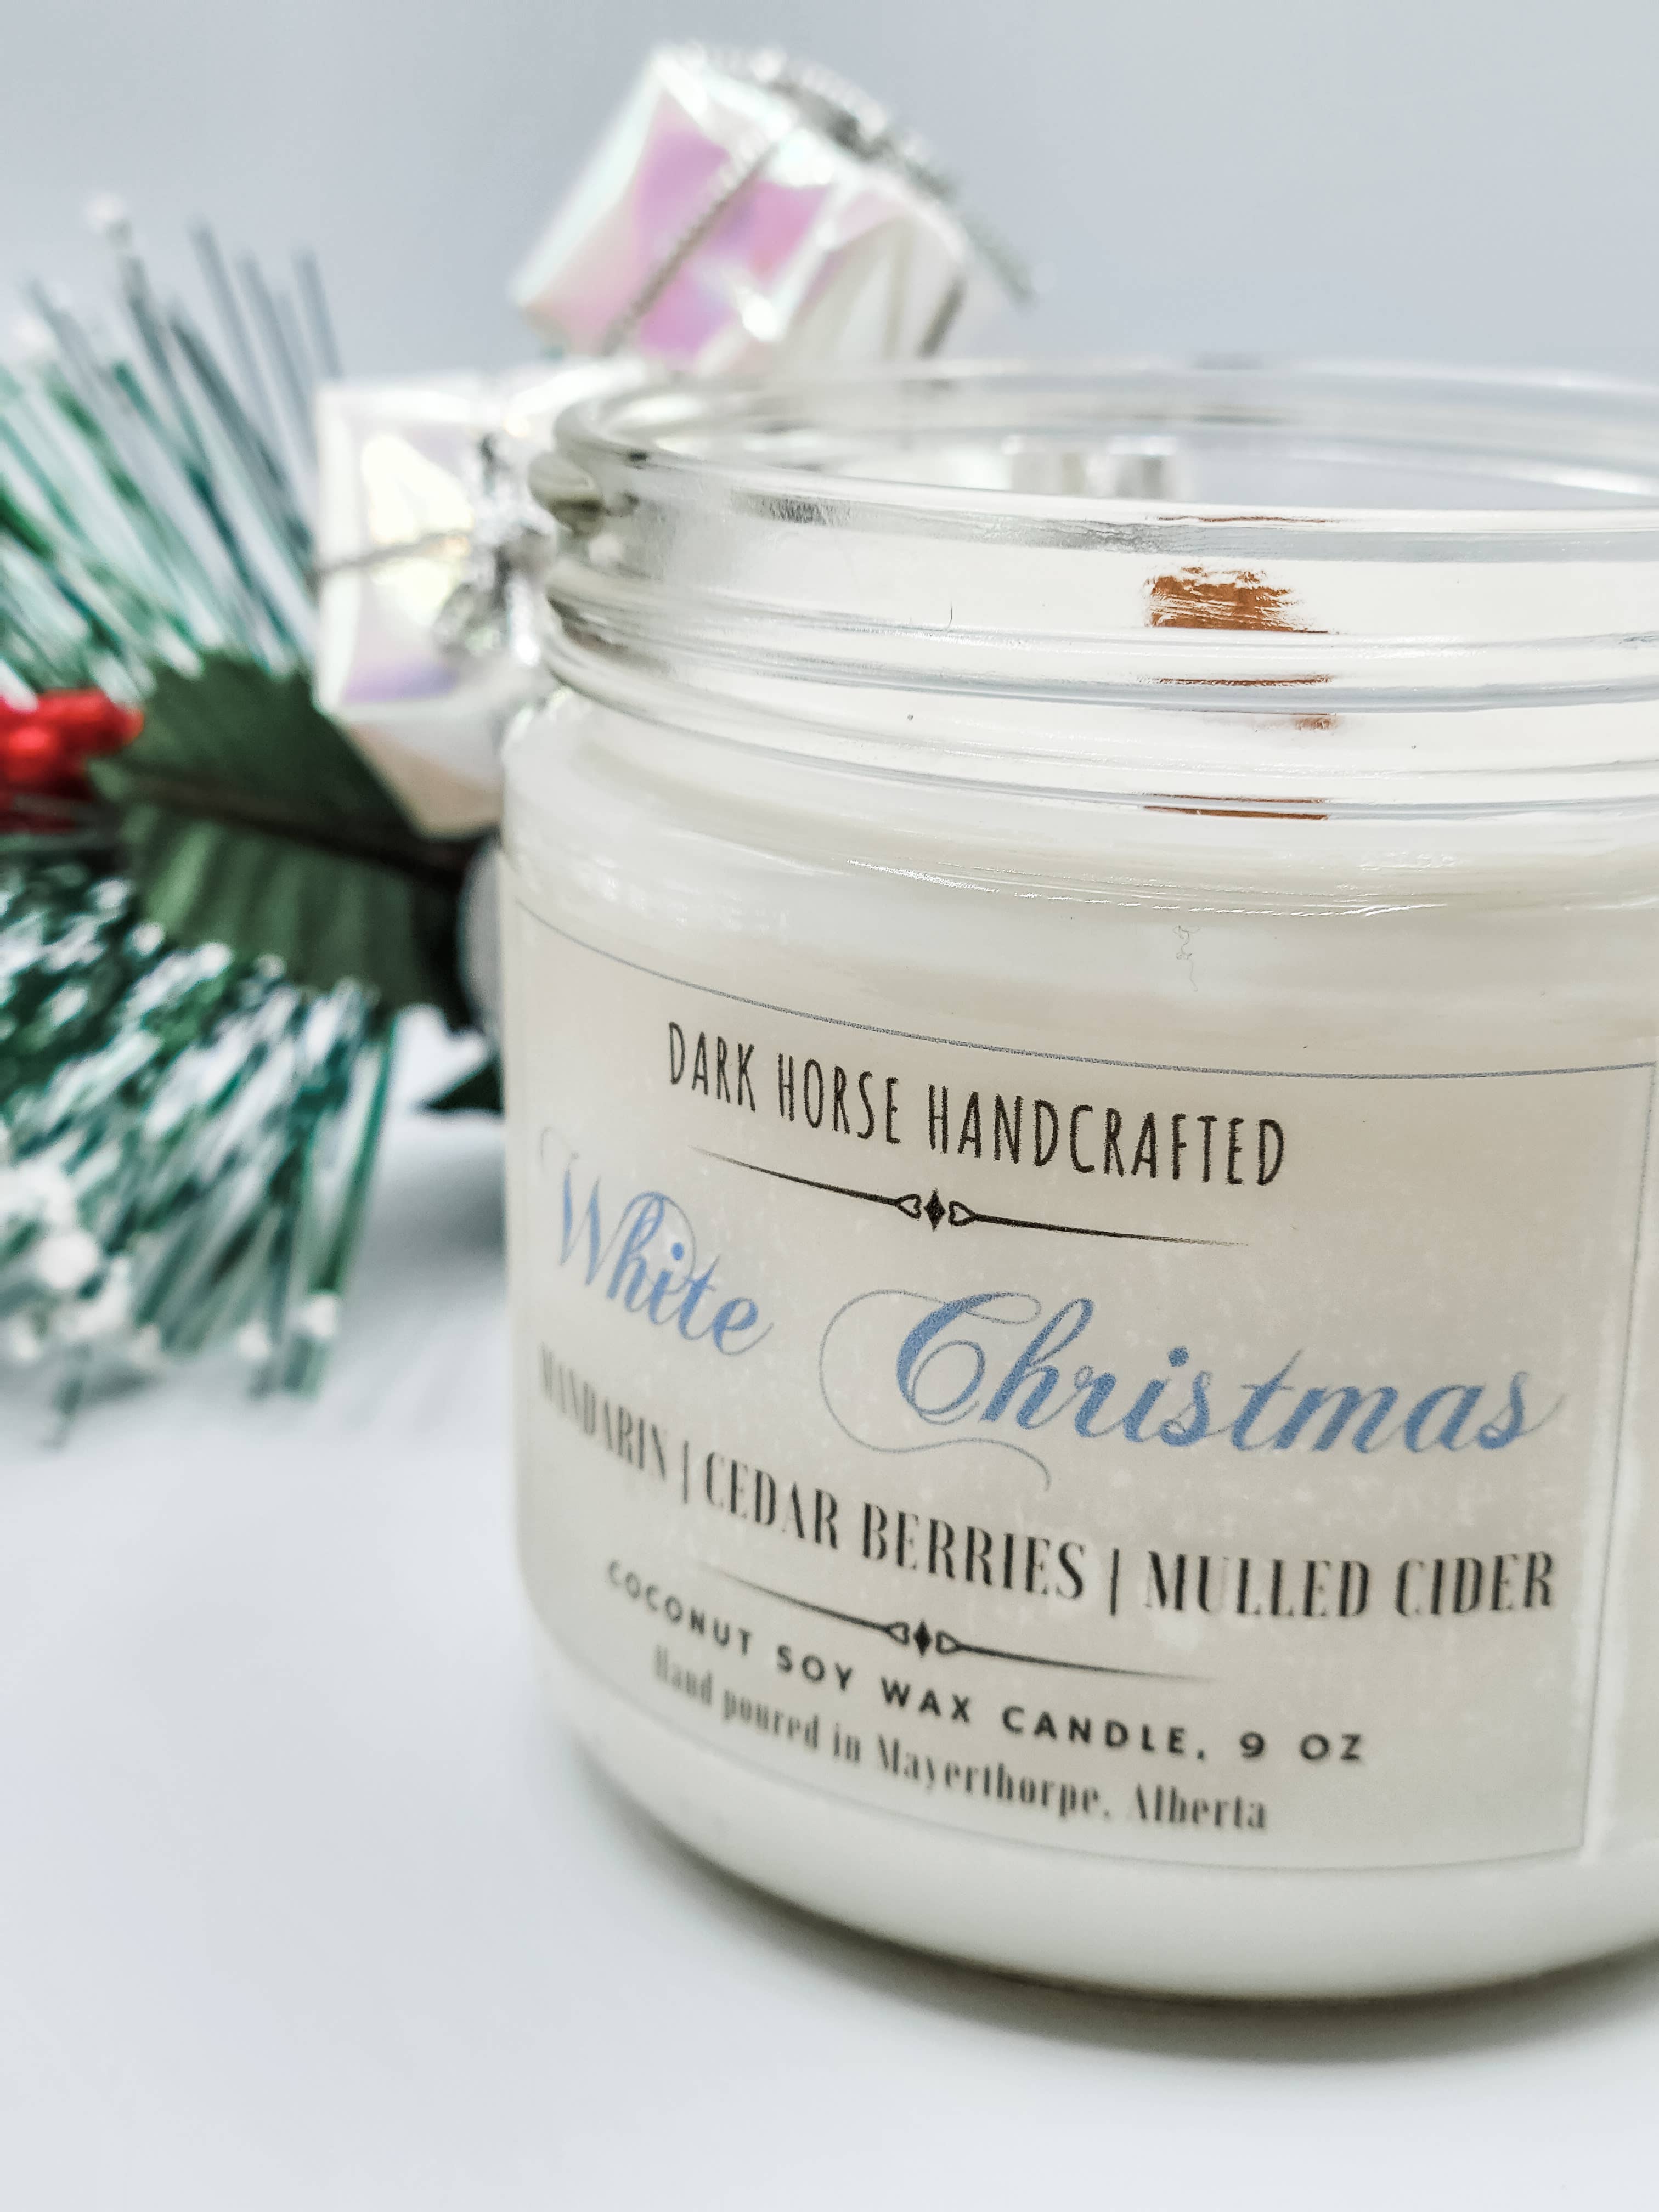 White Christmas - Holiday, Natural Coconut Soy Candle